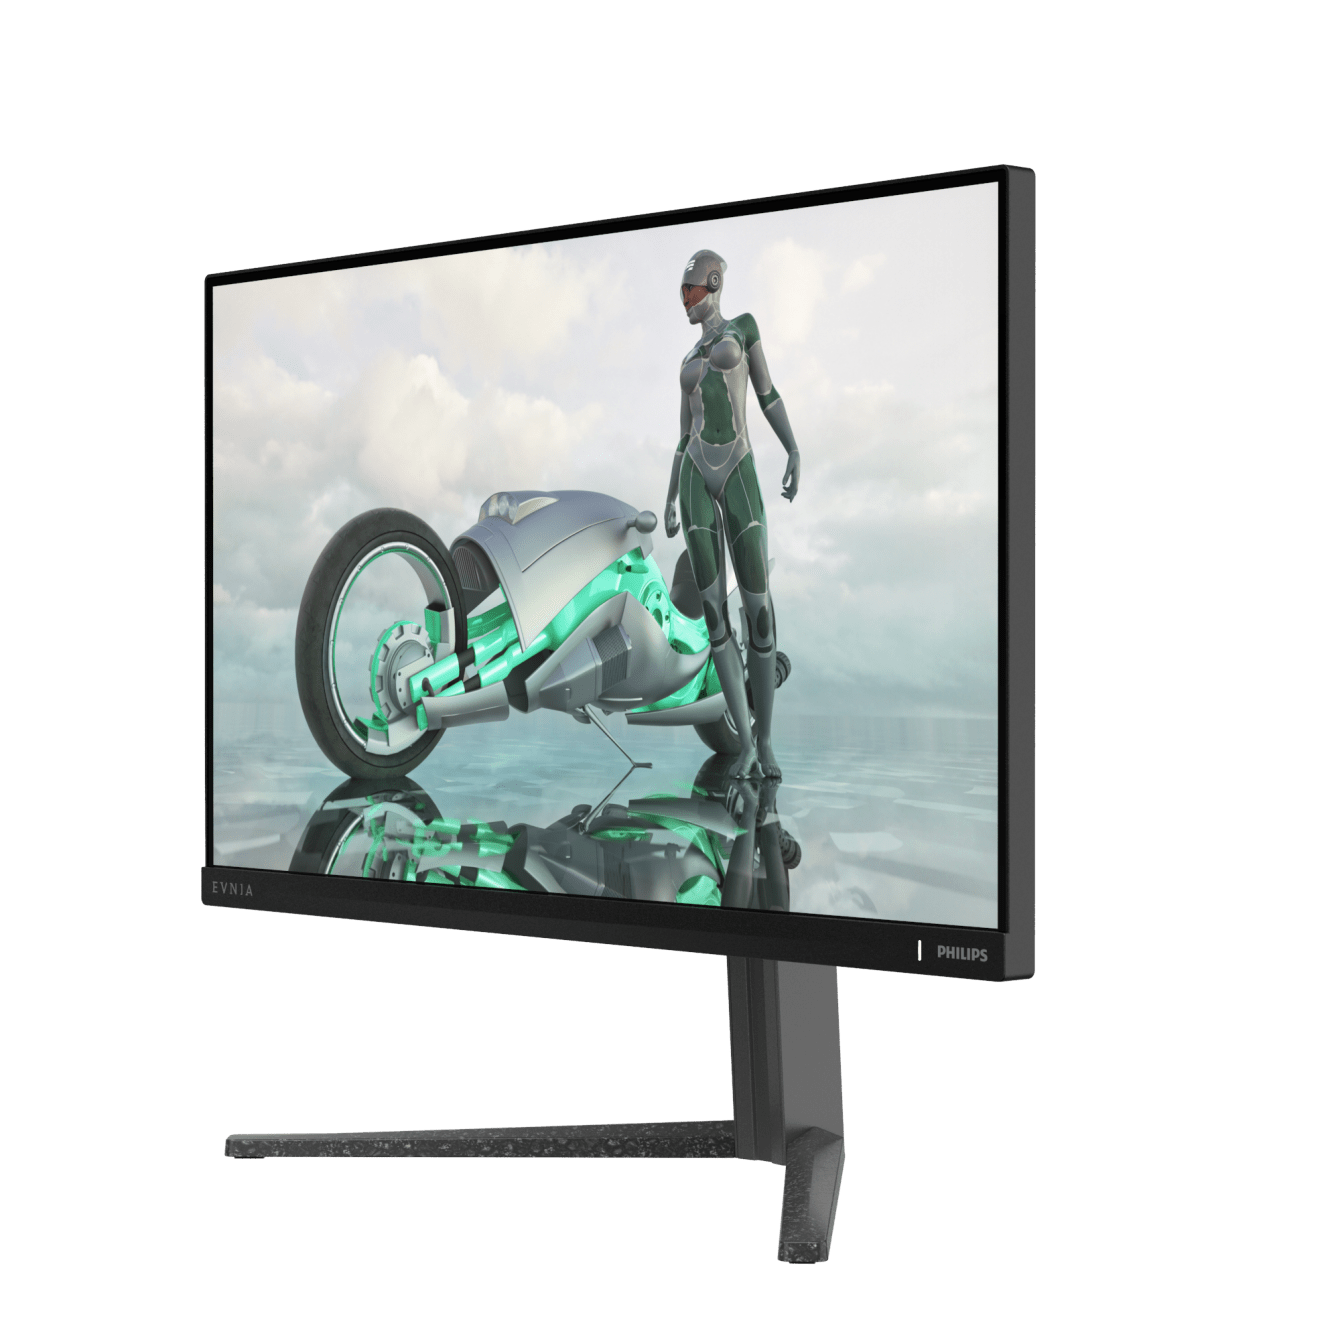 Philips Monitors presents two new displays of its Evnia gaming line